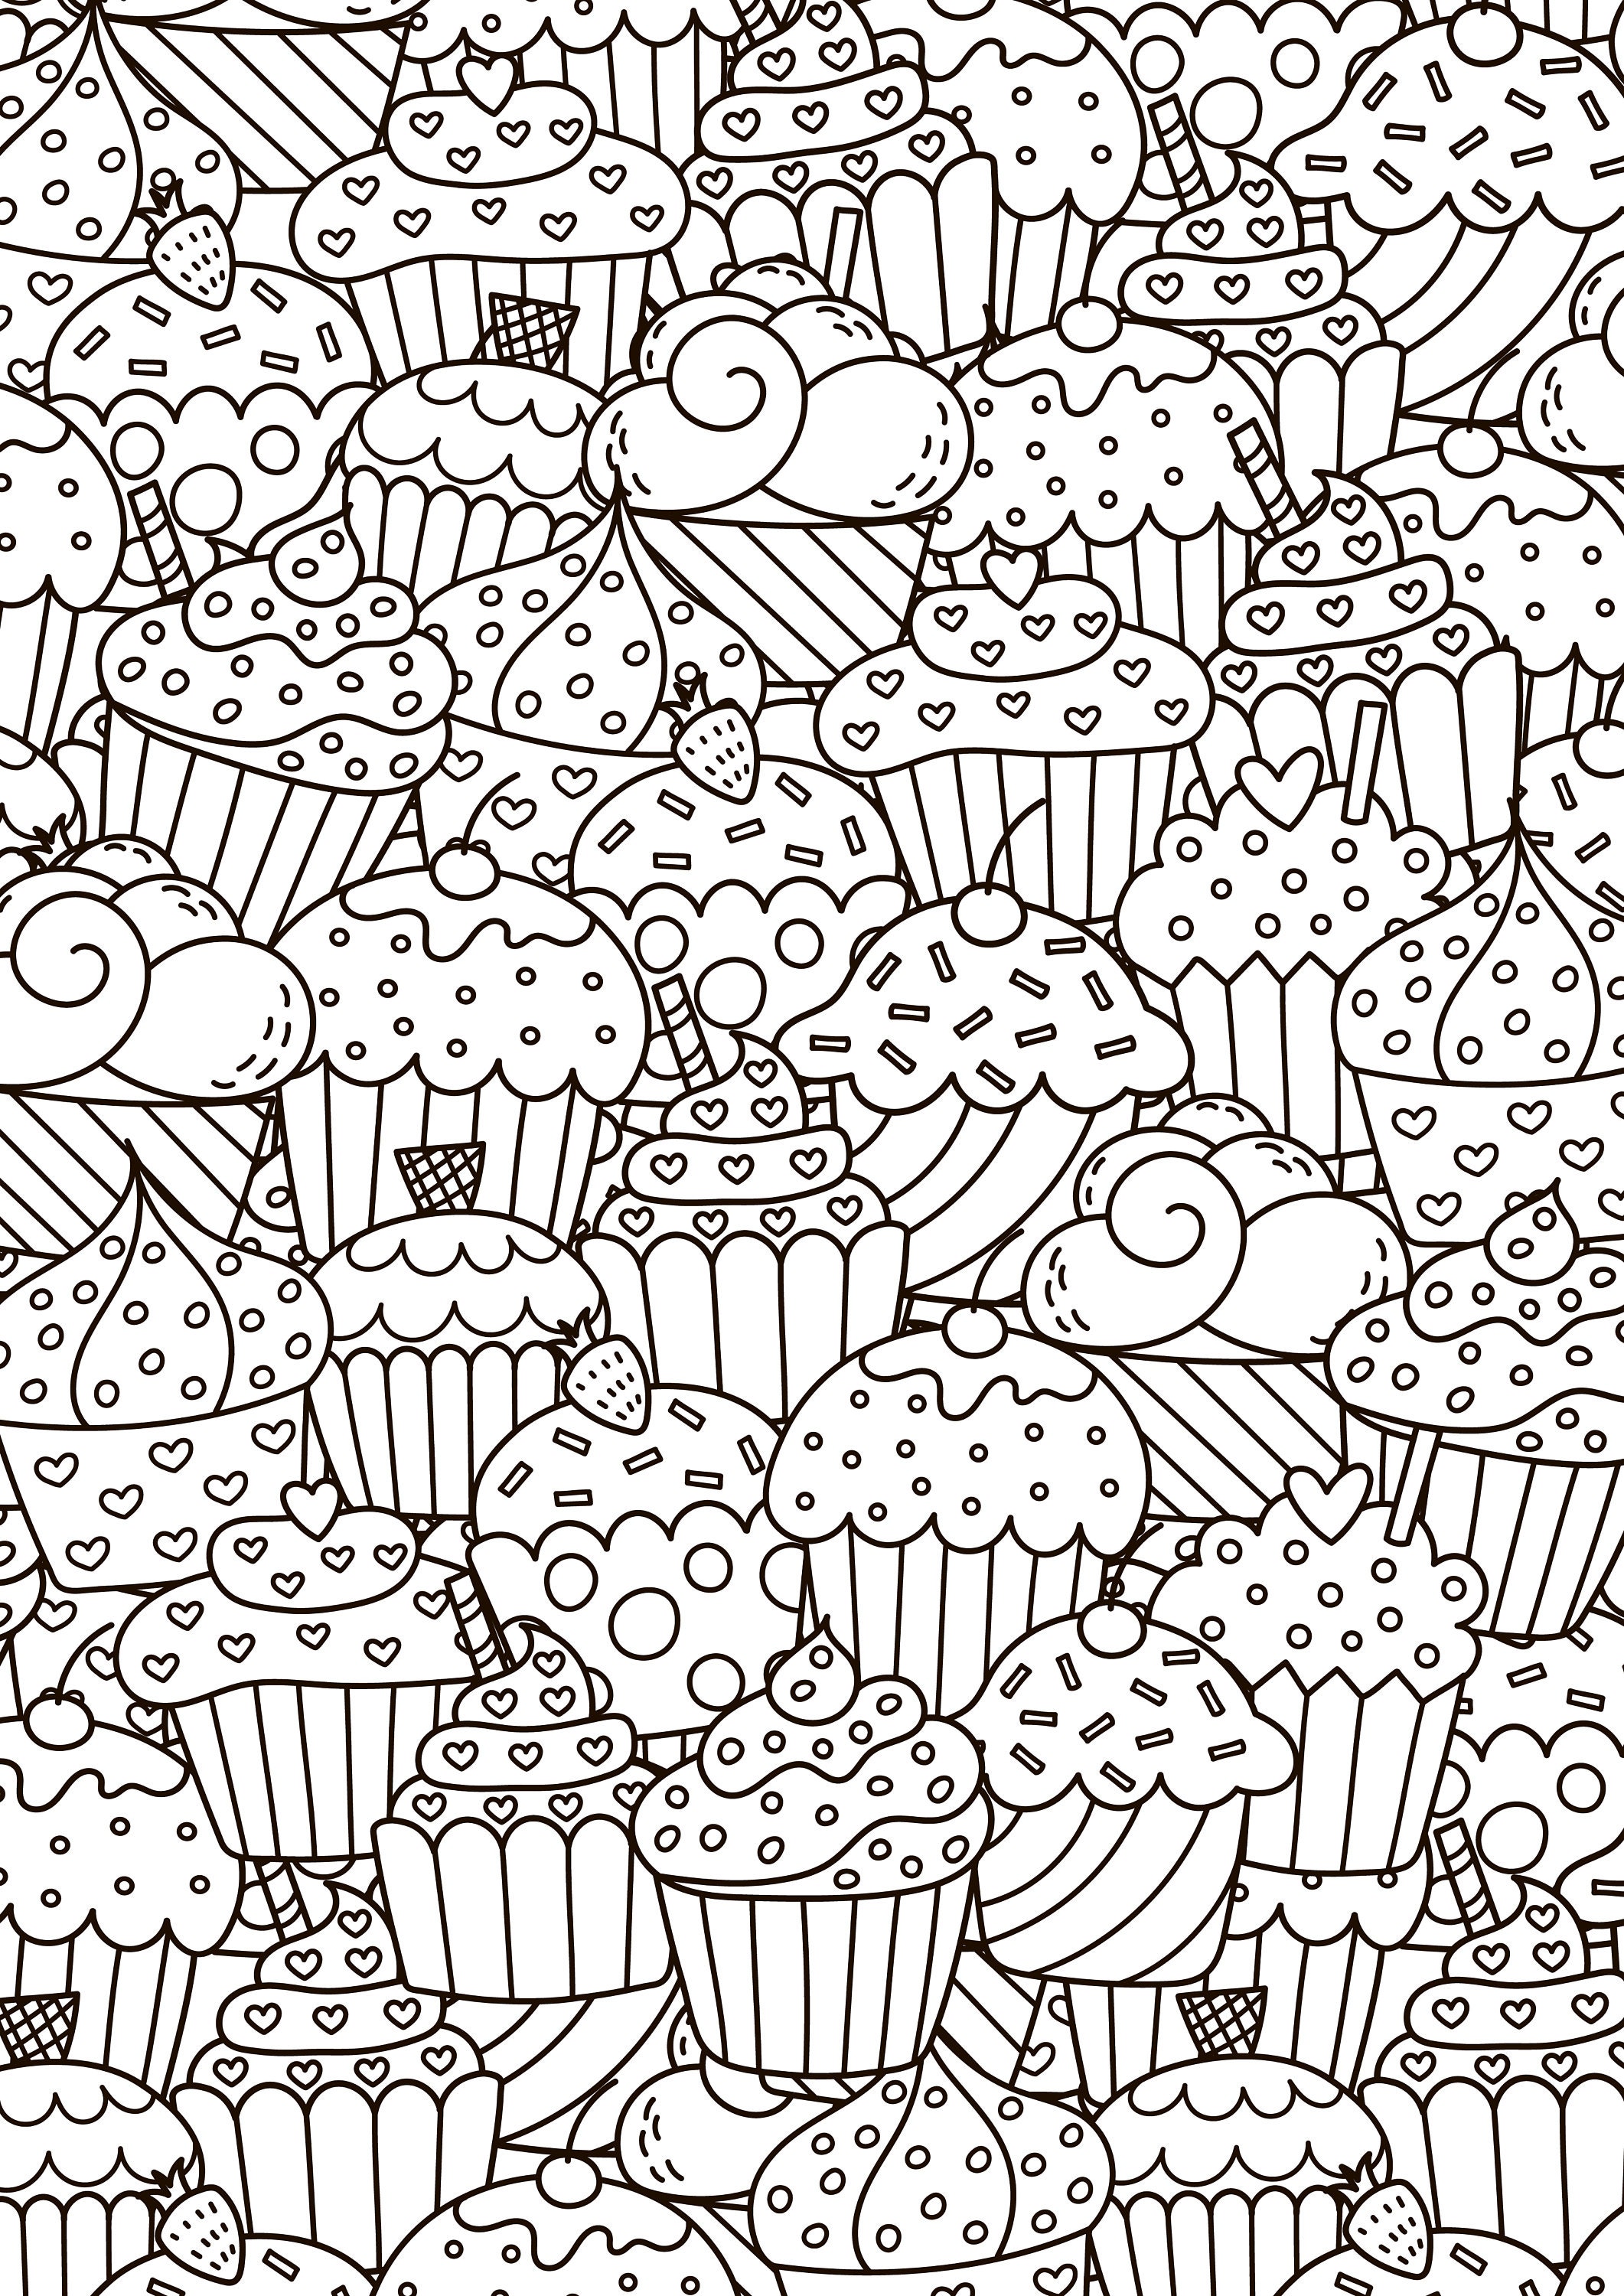 Coloring Page with Cupcakes   Printable Coloring Page for Adults and Kids    Jpg   Digital PDF for Download